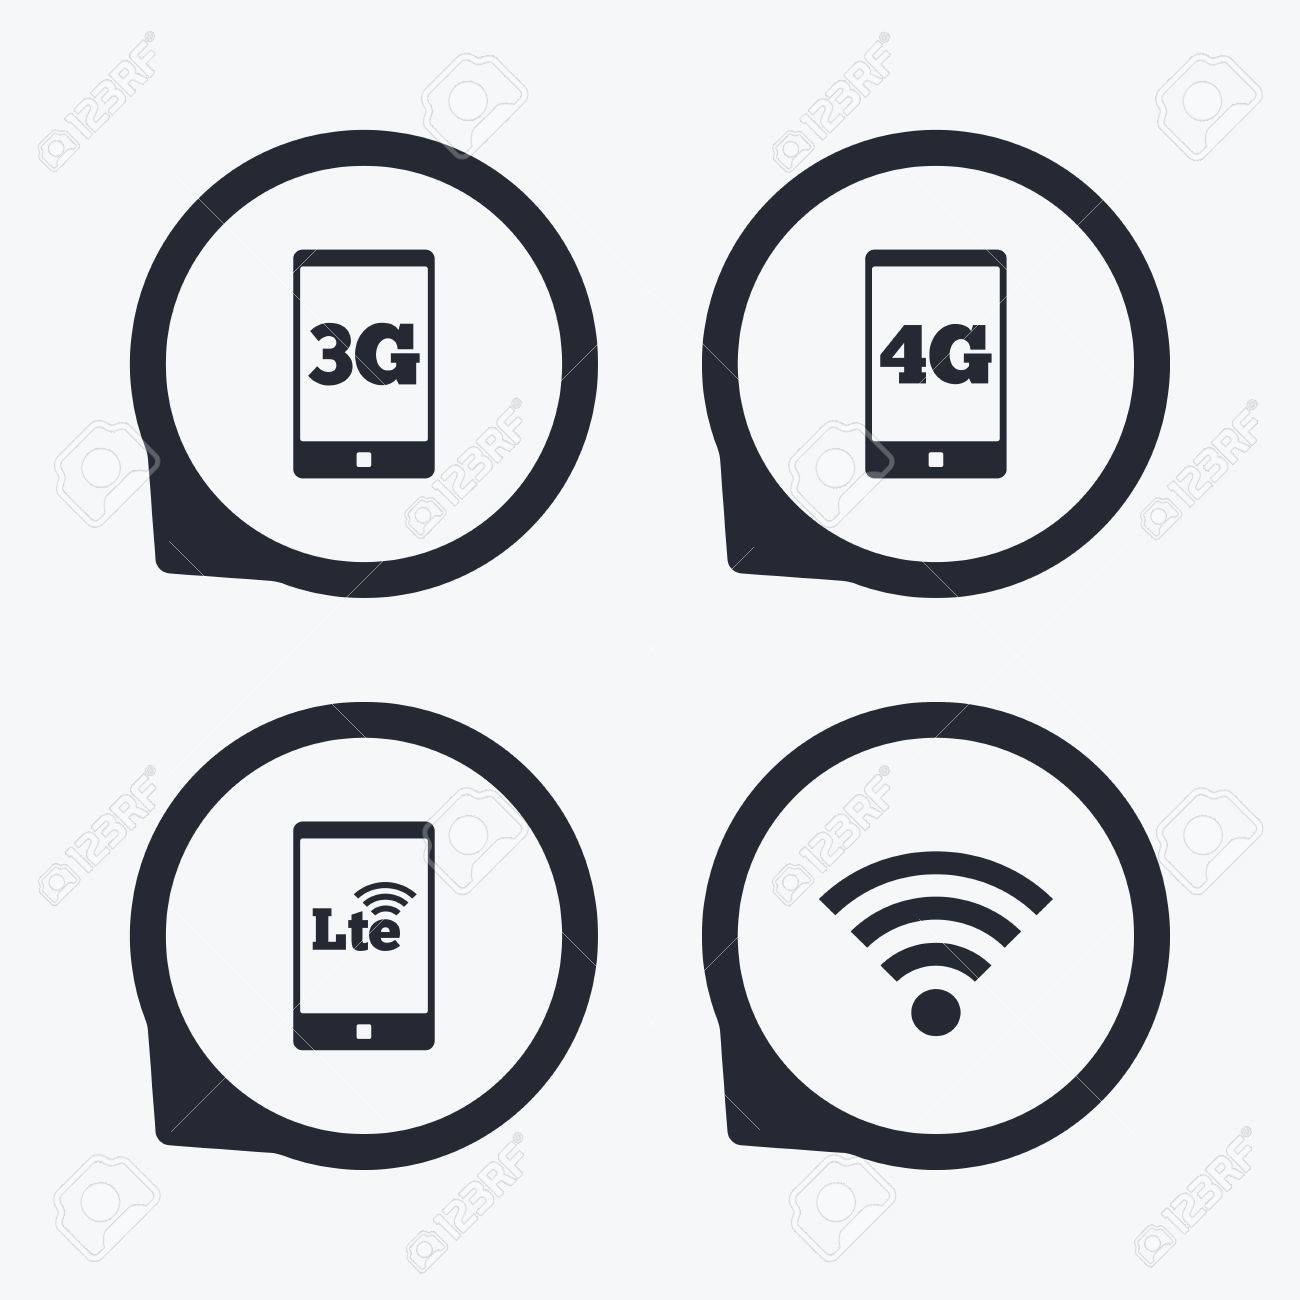 Mobile telecommunications icons. 3g, 4g and lte. Mobile vectors 